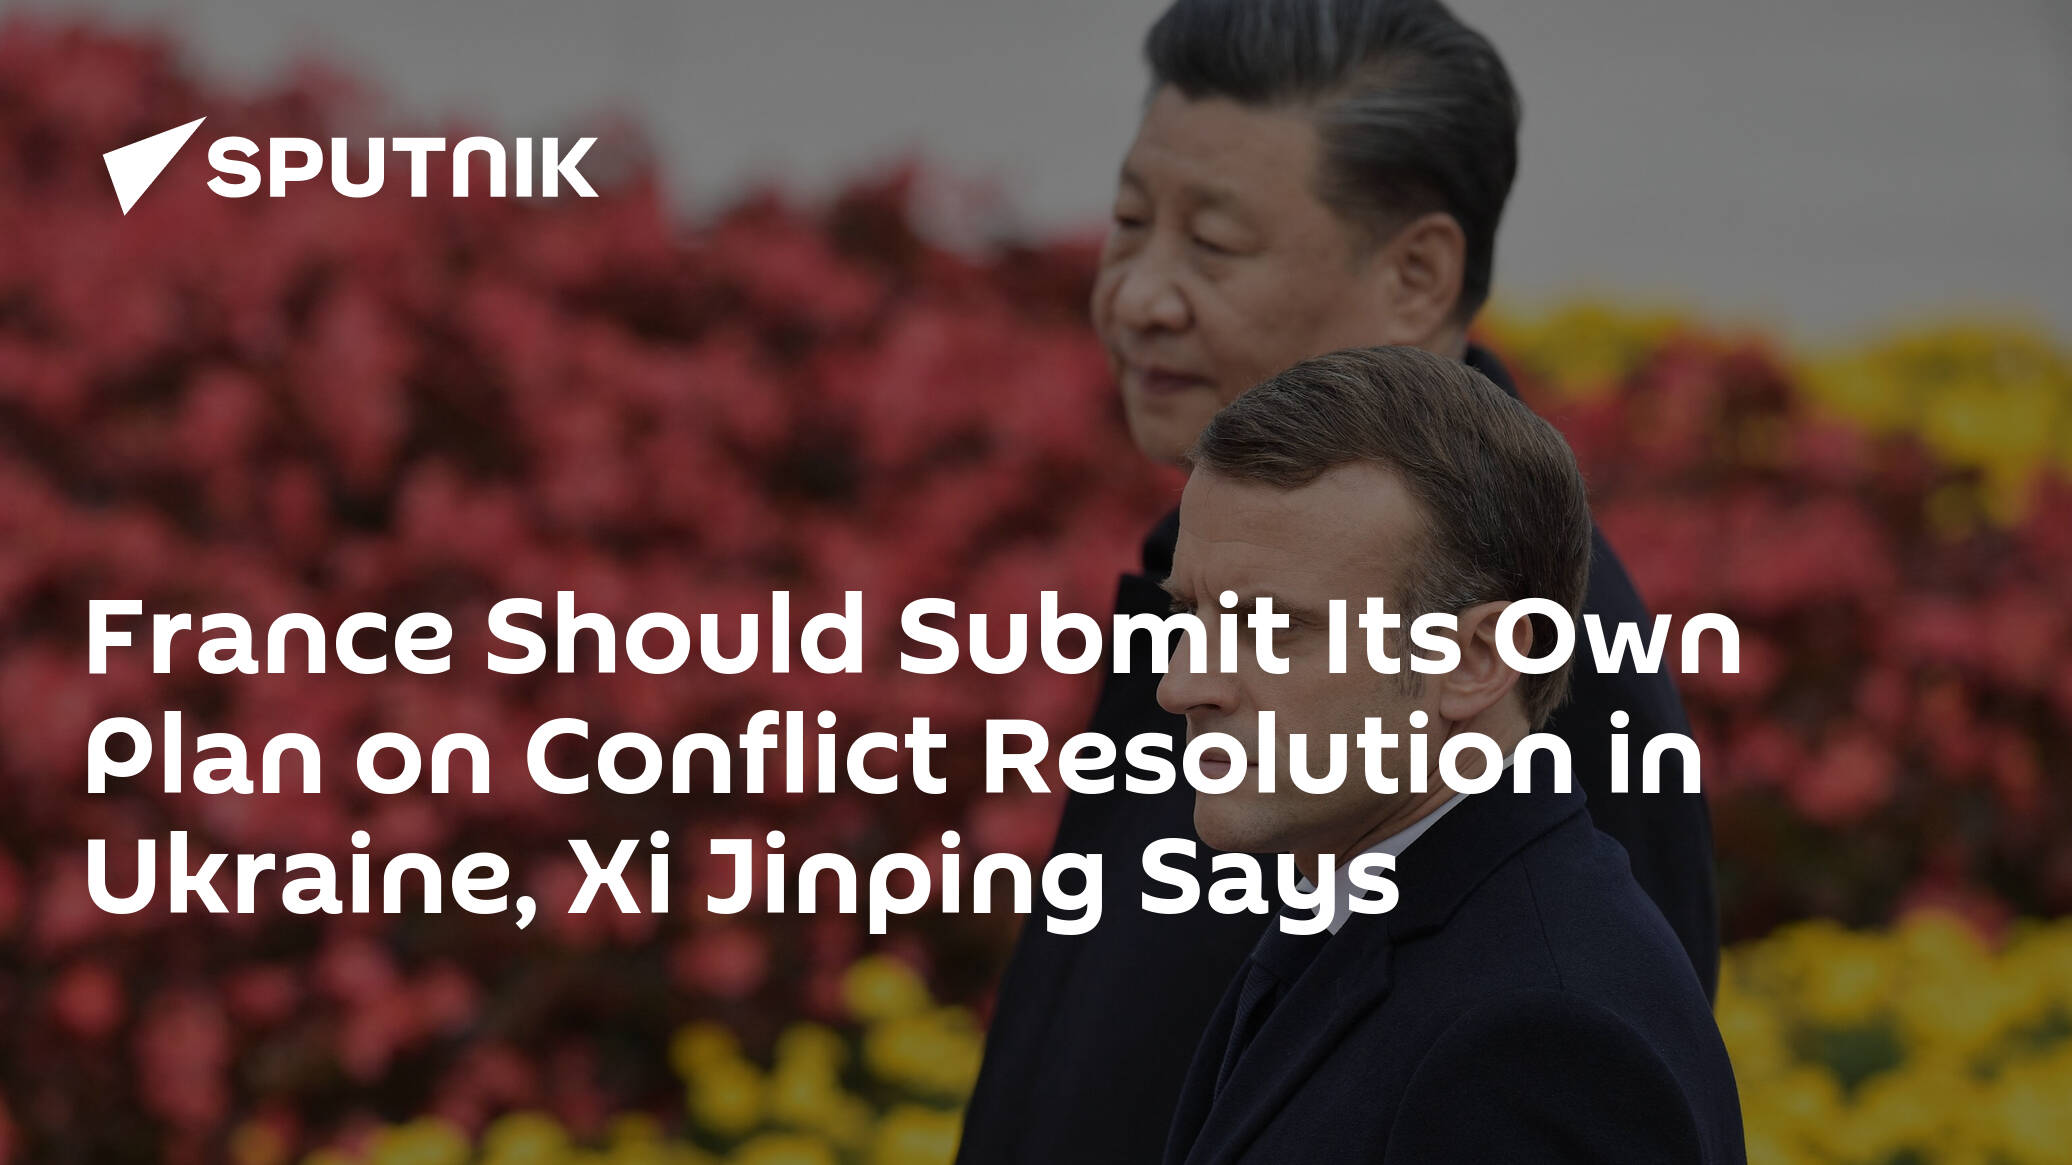 France Should Submit Its Own Plan on Conflict Resolution in Ukraine, Xi Jinping Says